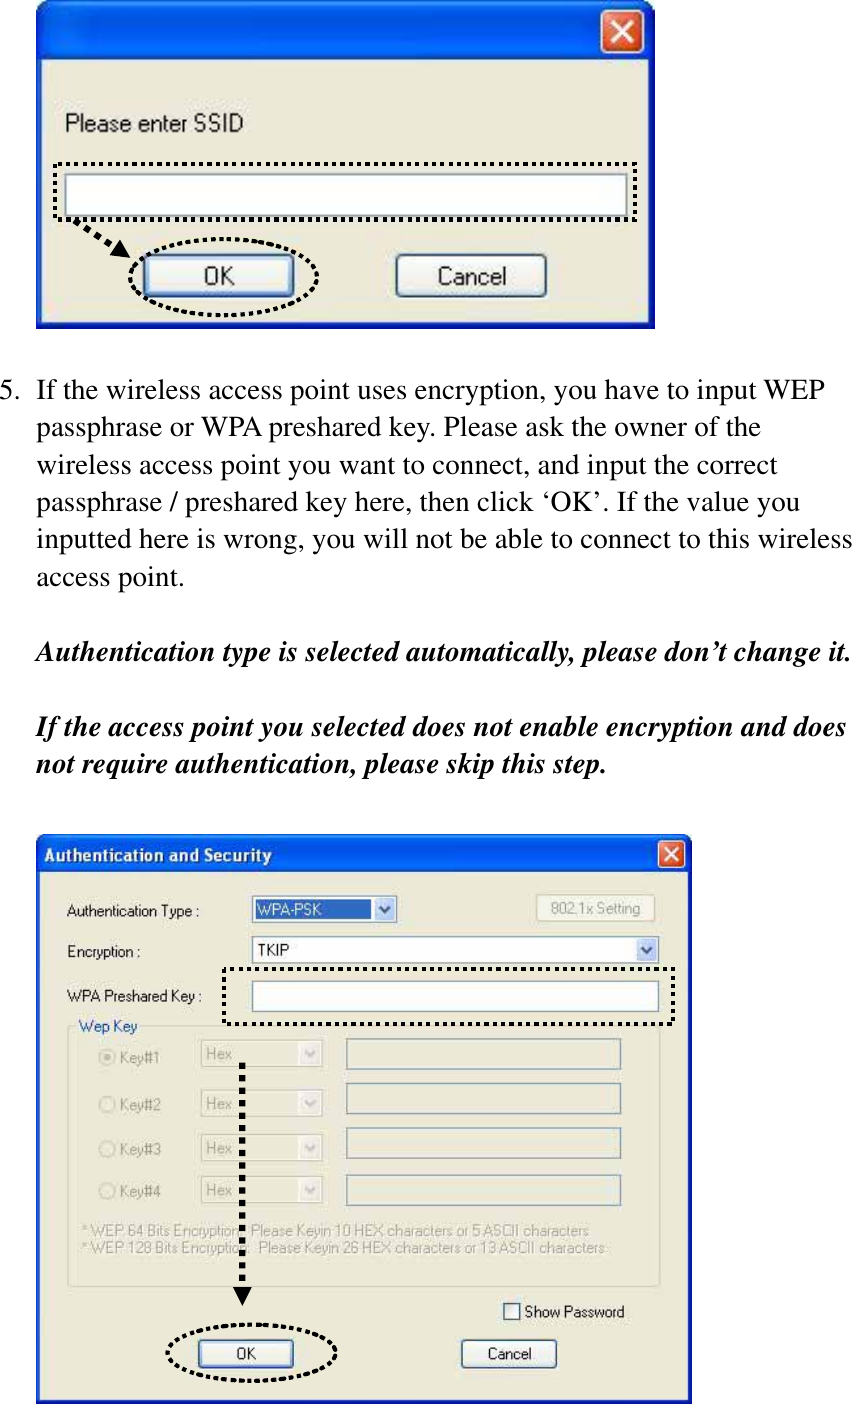 5. If the wireless access point uses encryption, you have to input WEP passphrase or WPA preshared key. Please ask the owner of the wireless access point you want to connect, and input the correct passphrase / preshared key here, then click ‘OK’. If the value you inputted here is wrong, you will not be able to connect to this wireless access point. Authentication type is selected automatically, please don’t change it.   If the access point you selected does not enable encryption and does not require authentication, please skip this step. 